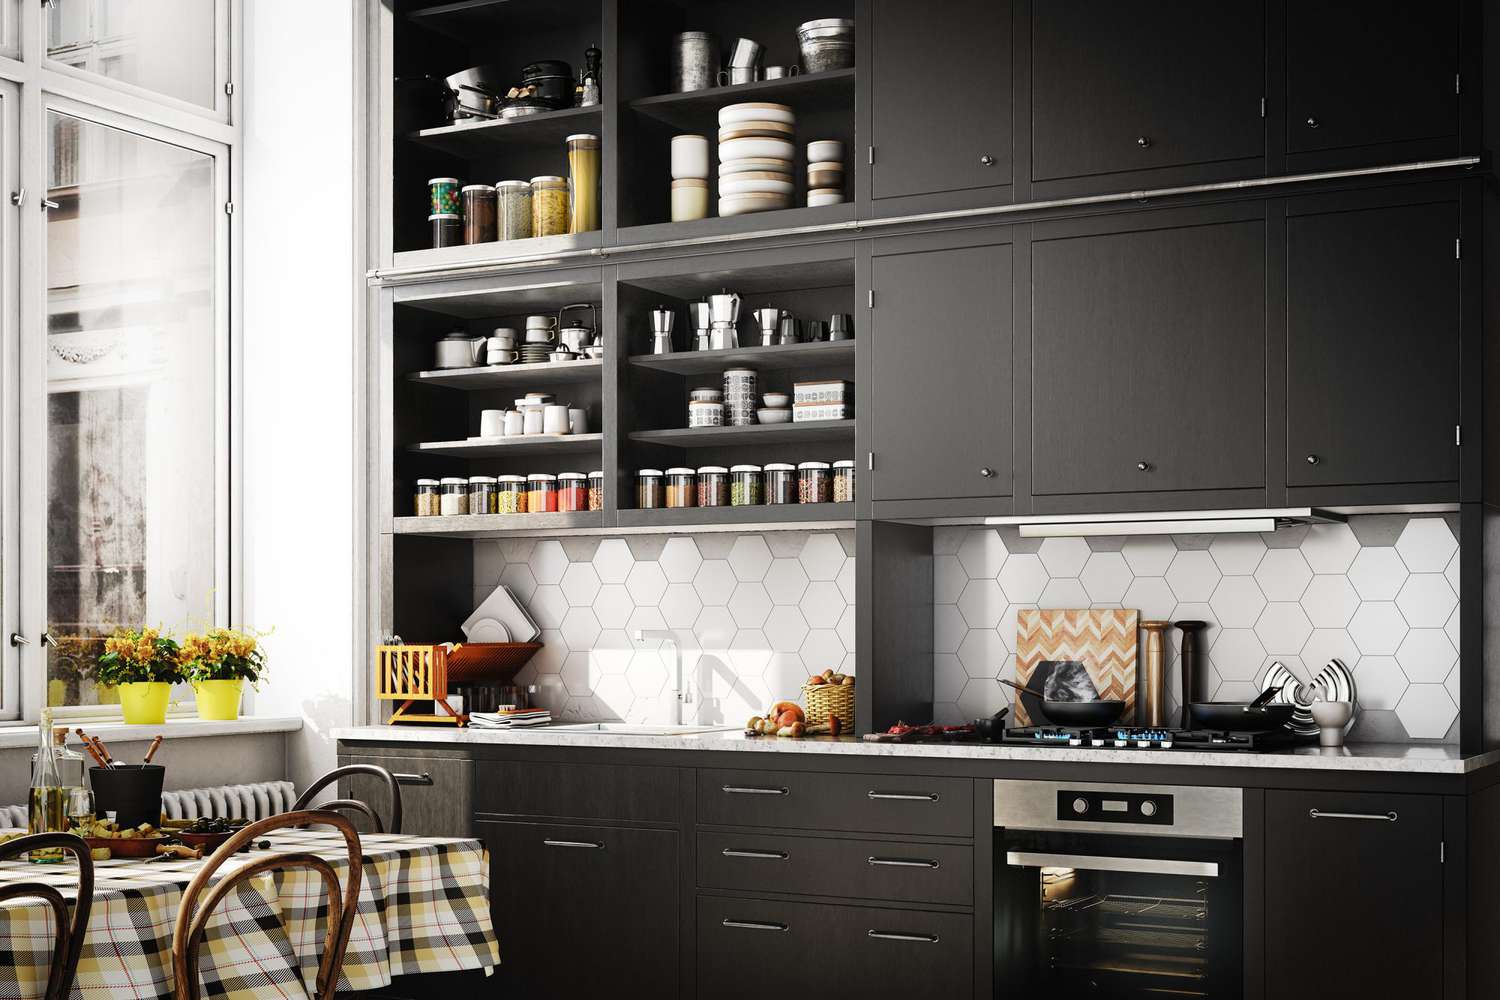 Top Tips to Organize Kitchen Cabinets